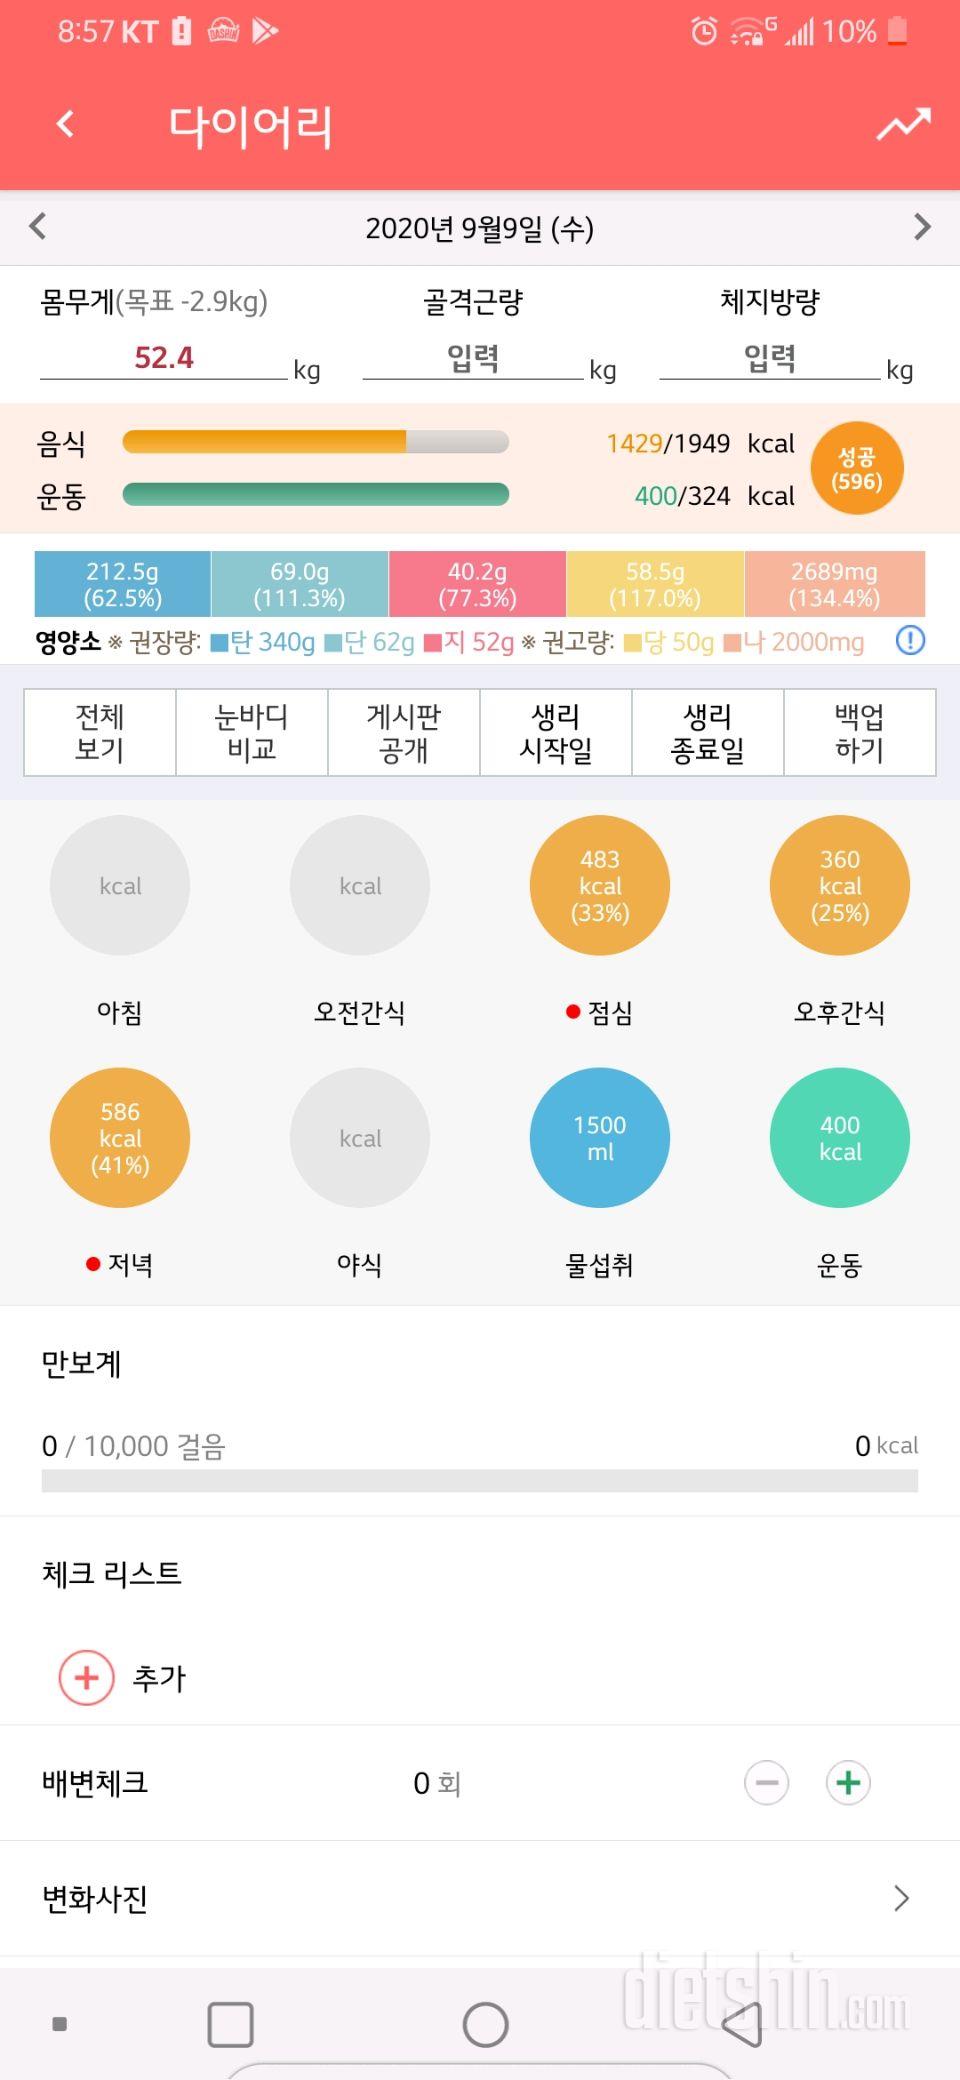 9월 9일 수욜